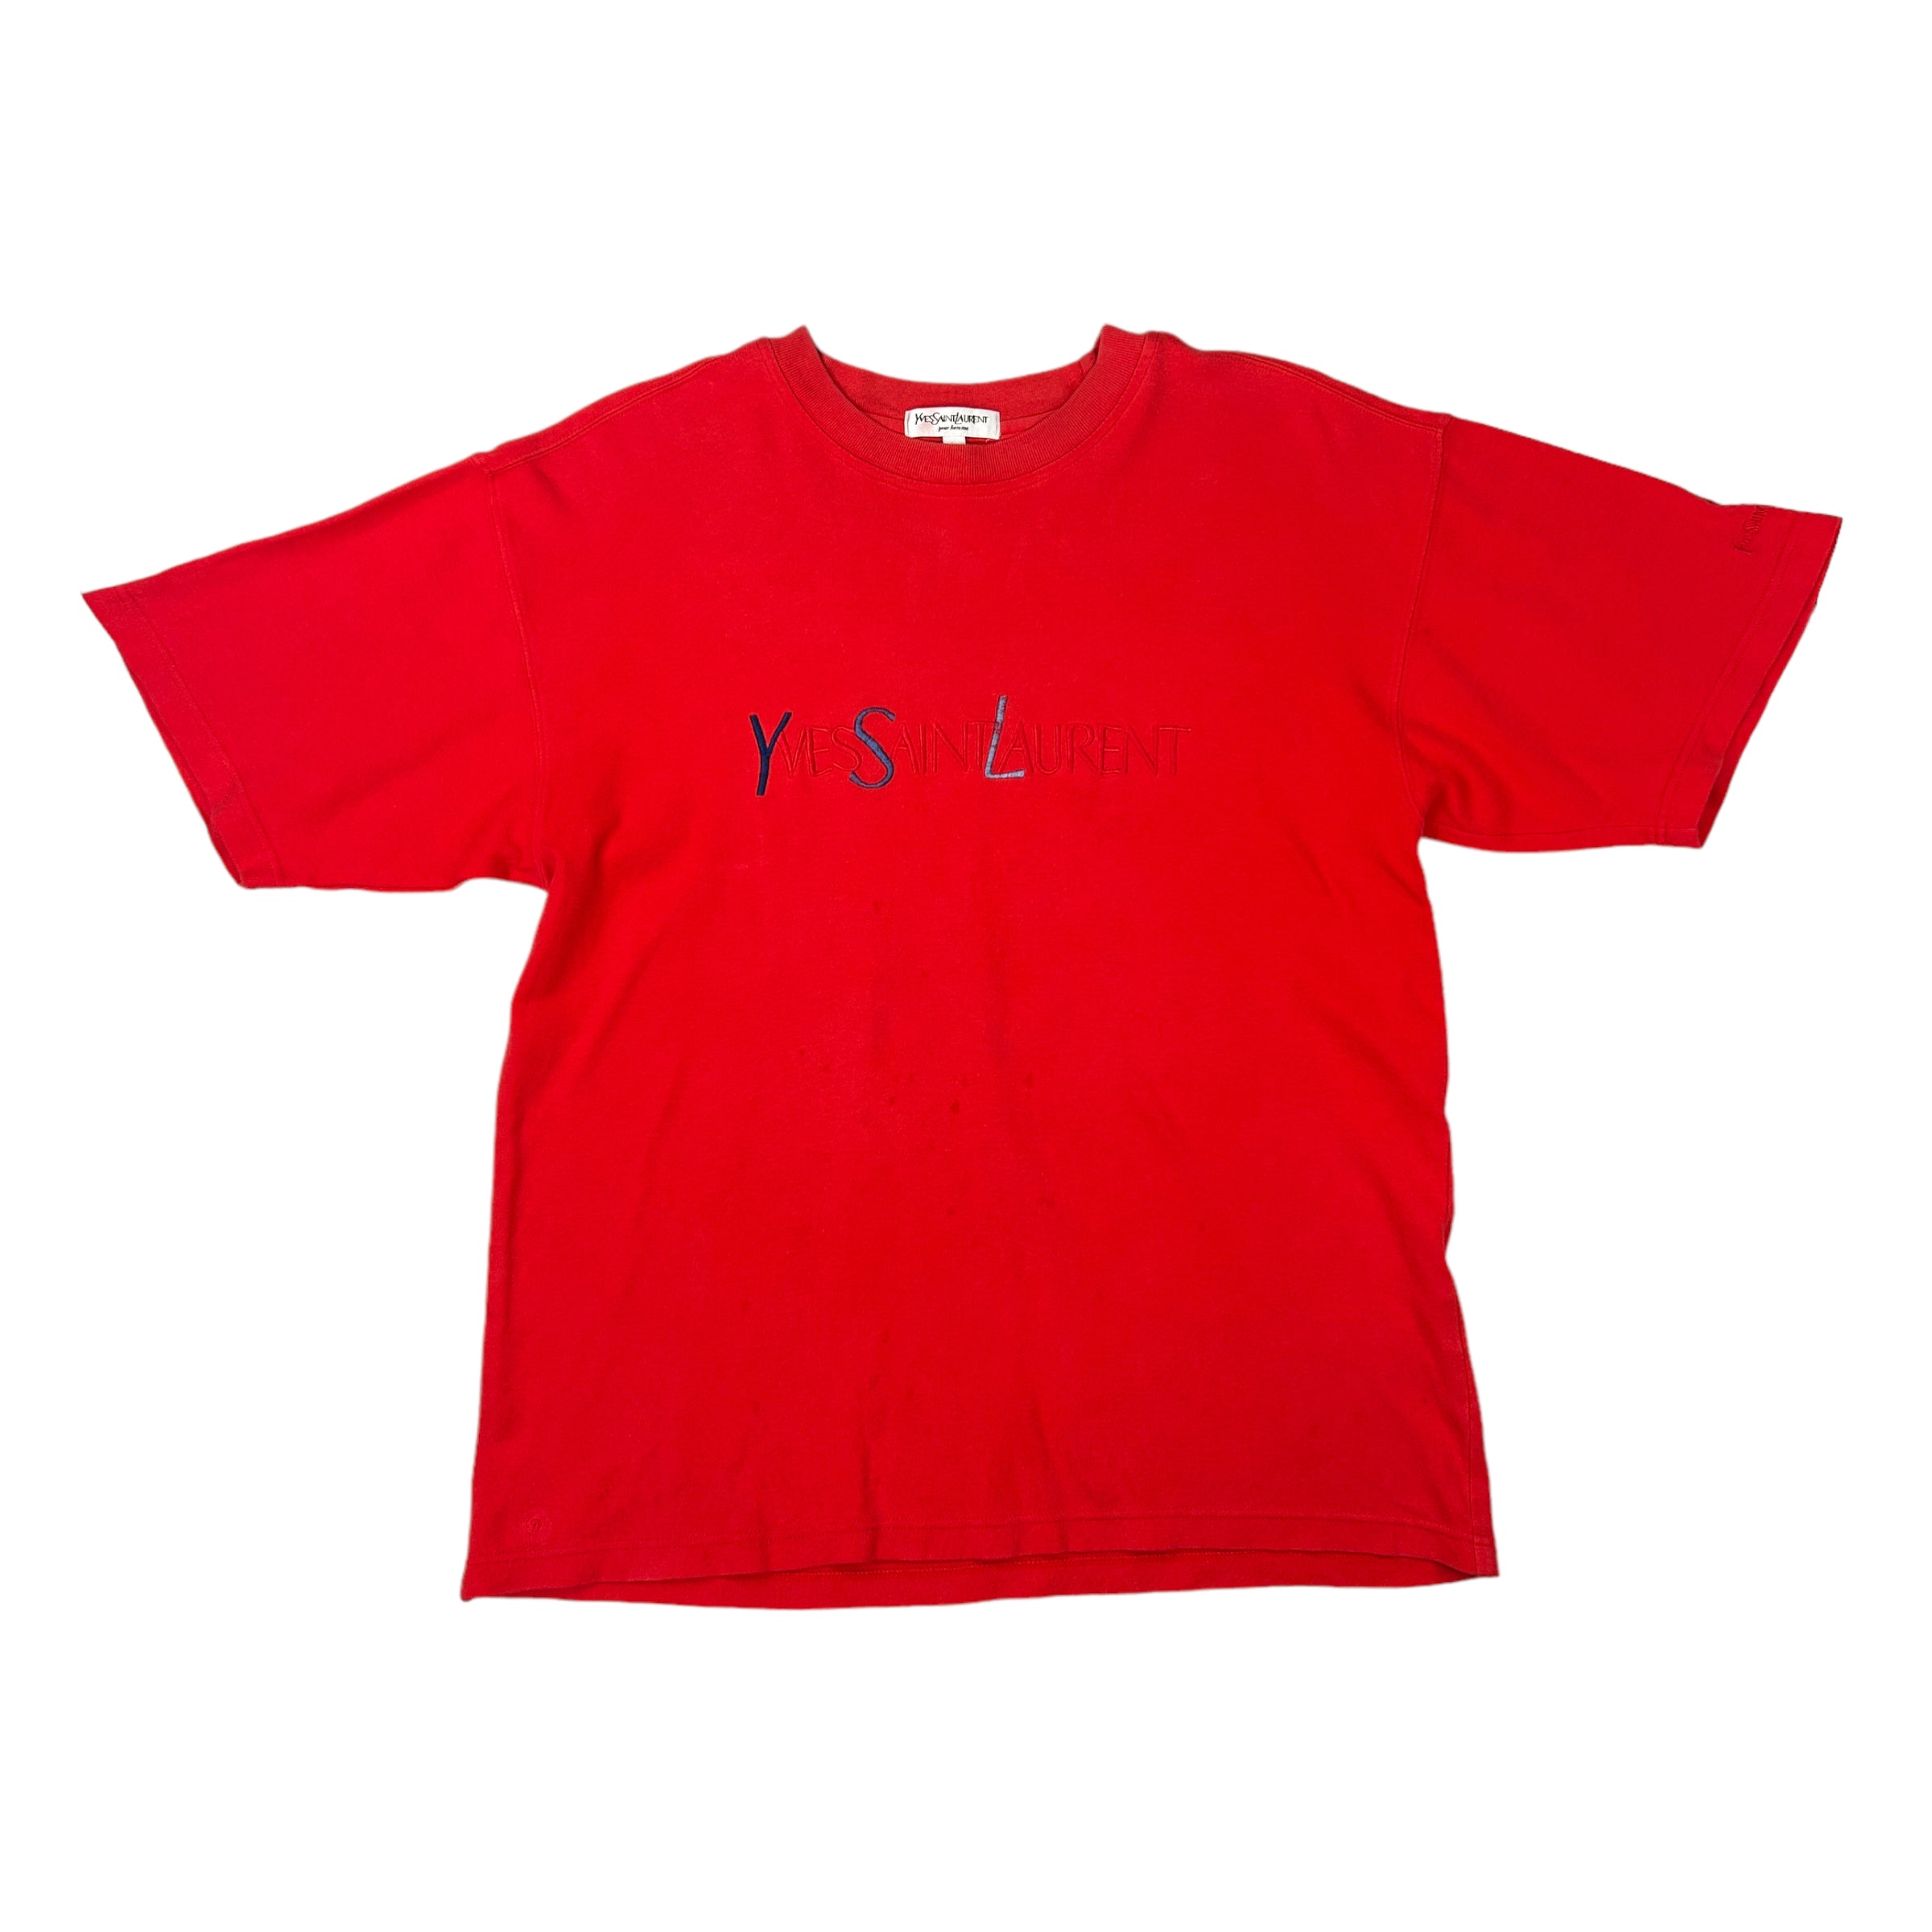 YSL EMBROIDERED SPELLOUT TEE - RED